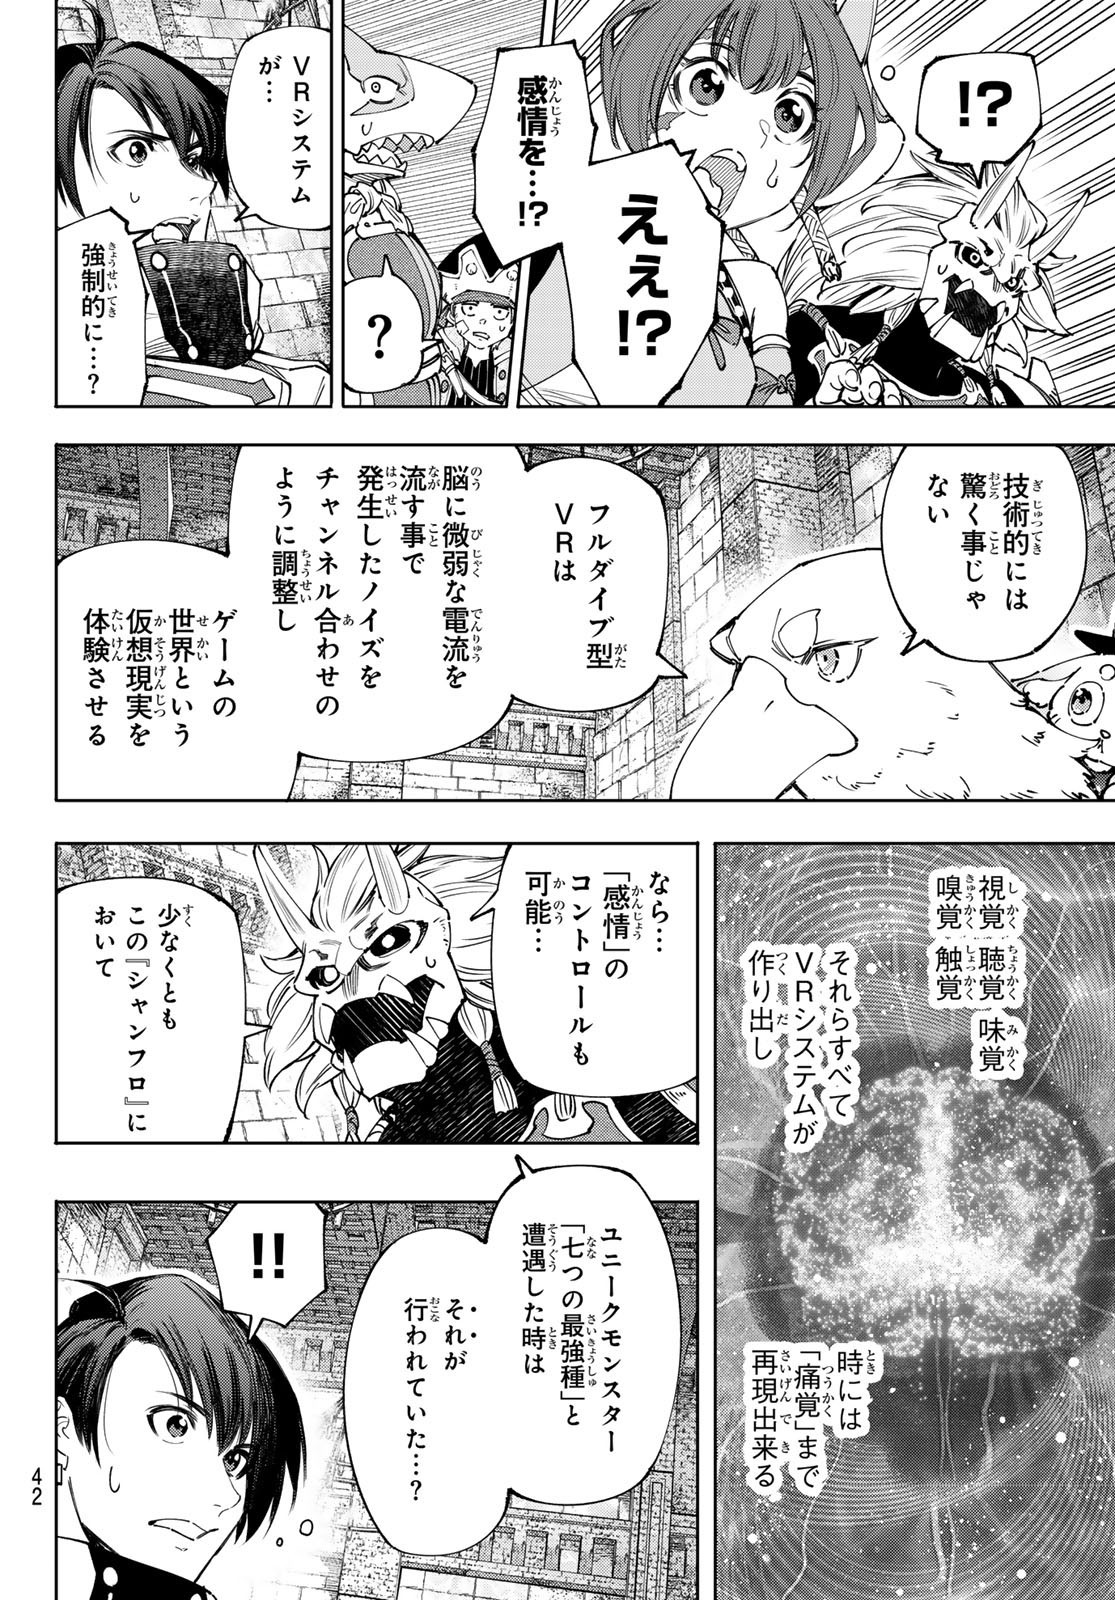 Weekly Shōnen Magazine - 週刊少年マガジン - Chapter 2024-24 - Page 42